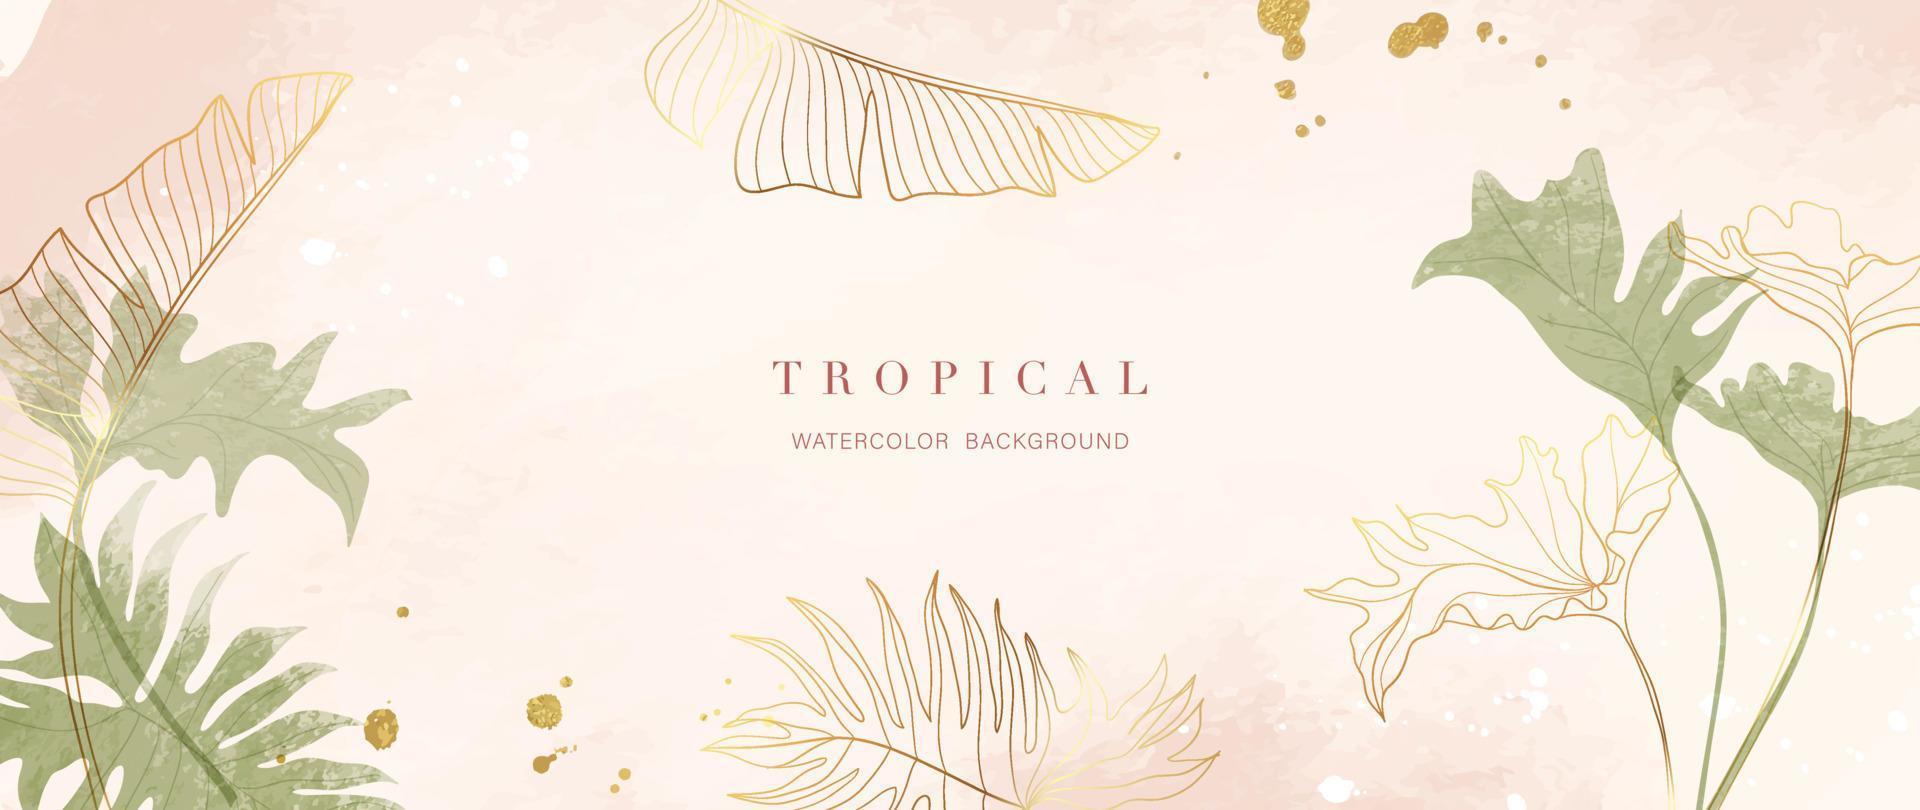 Tropical foliage watercolor background vector. Summer botanical design with gold line art, monstera, palm, watercolor texture. Luxury tropical jungle illustration for banner, poster and wallpaper. vector